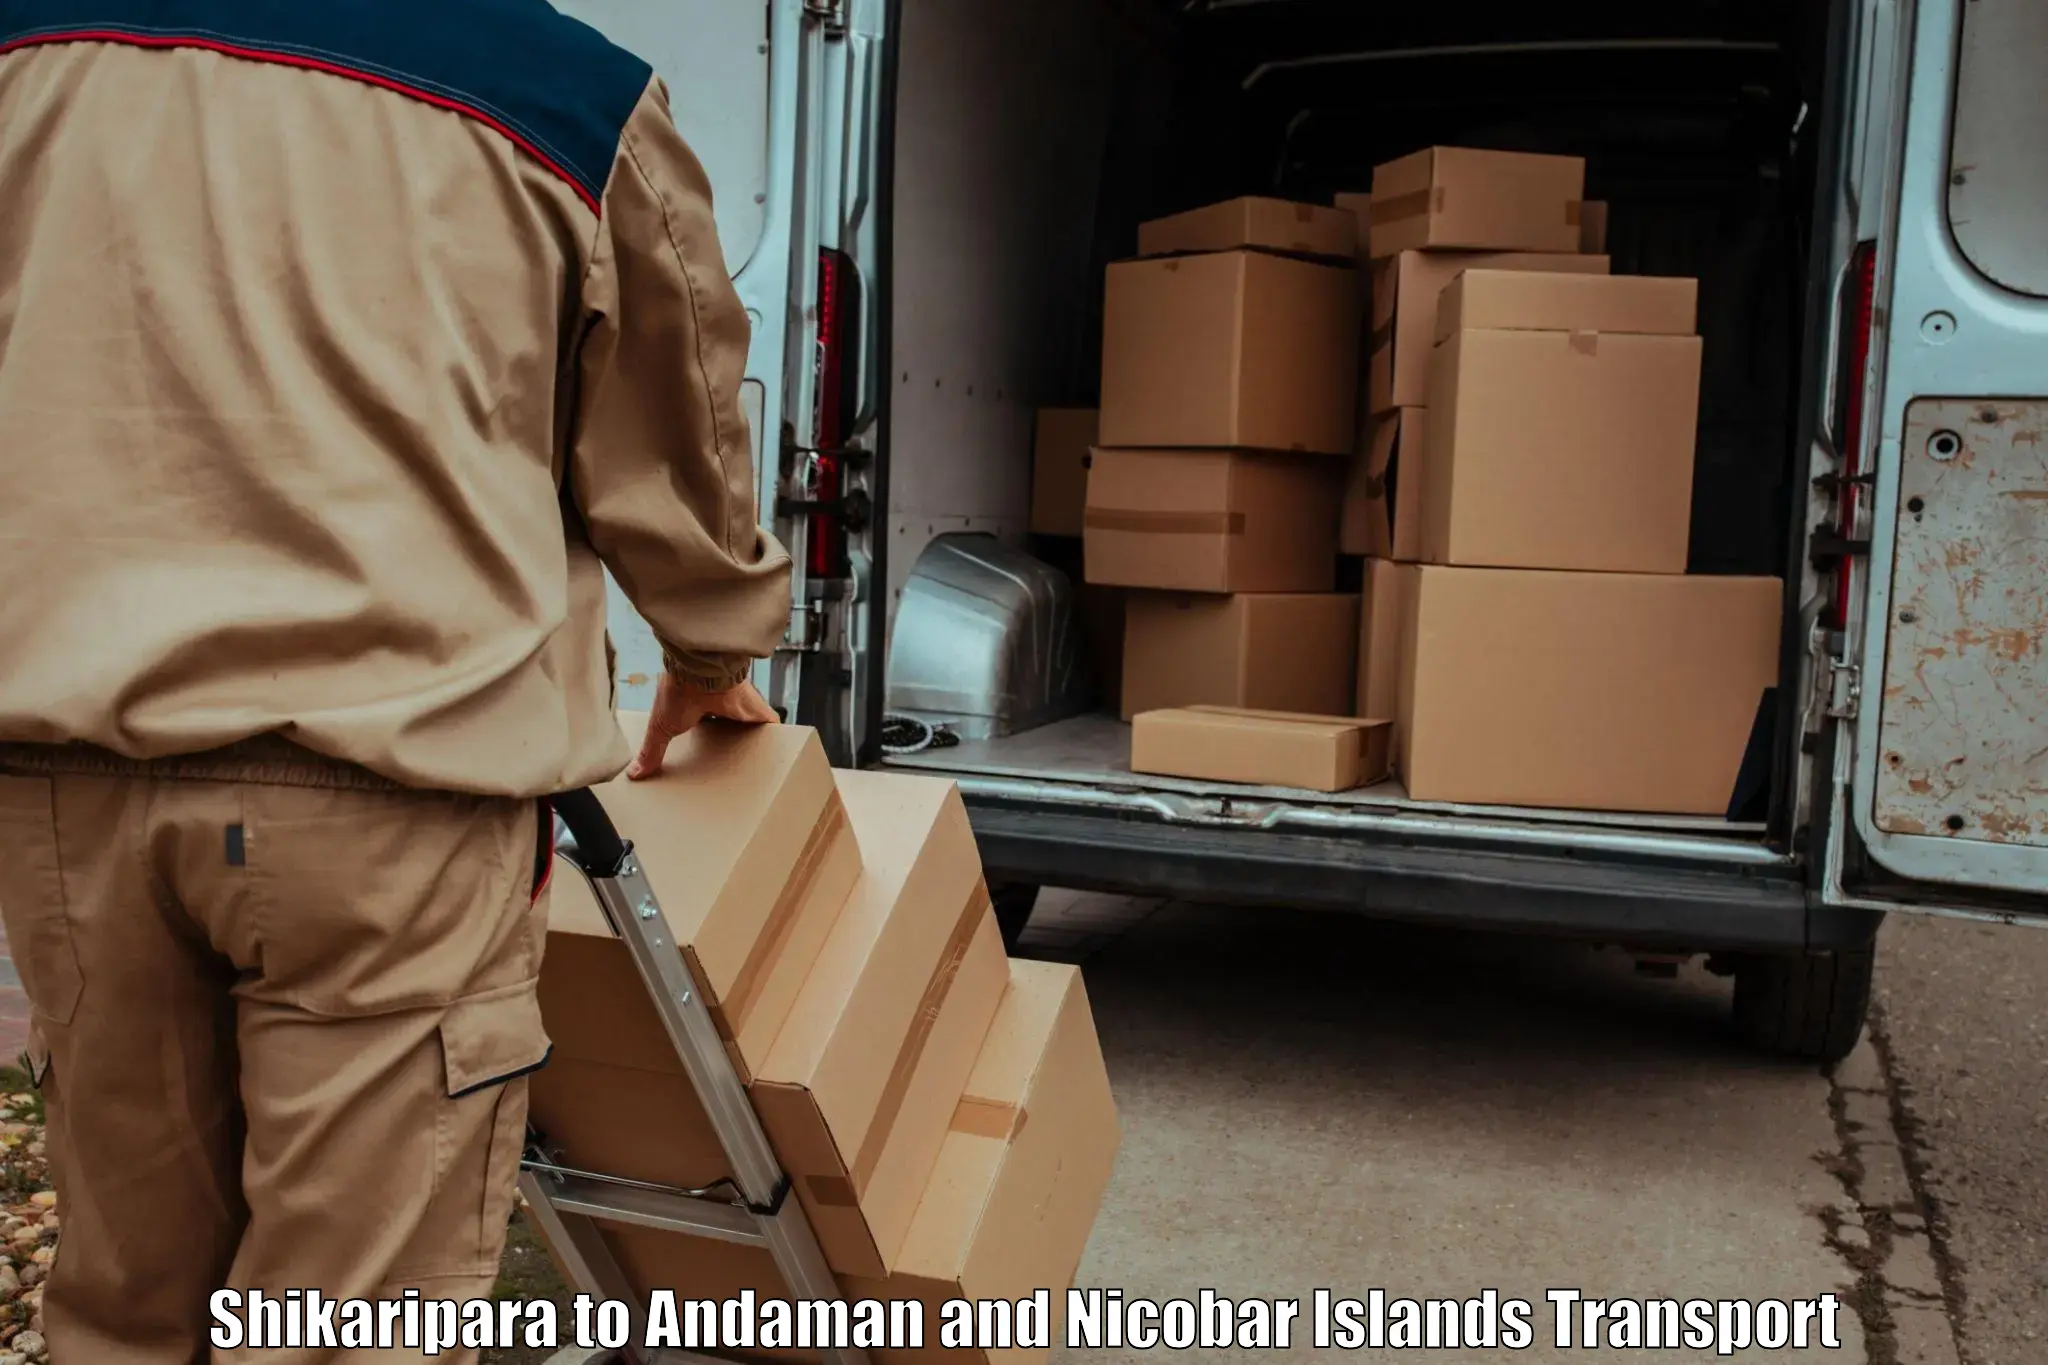 Furniture transport service in Shikaripara to North And Middle Andaman